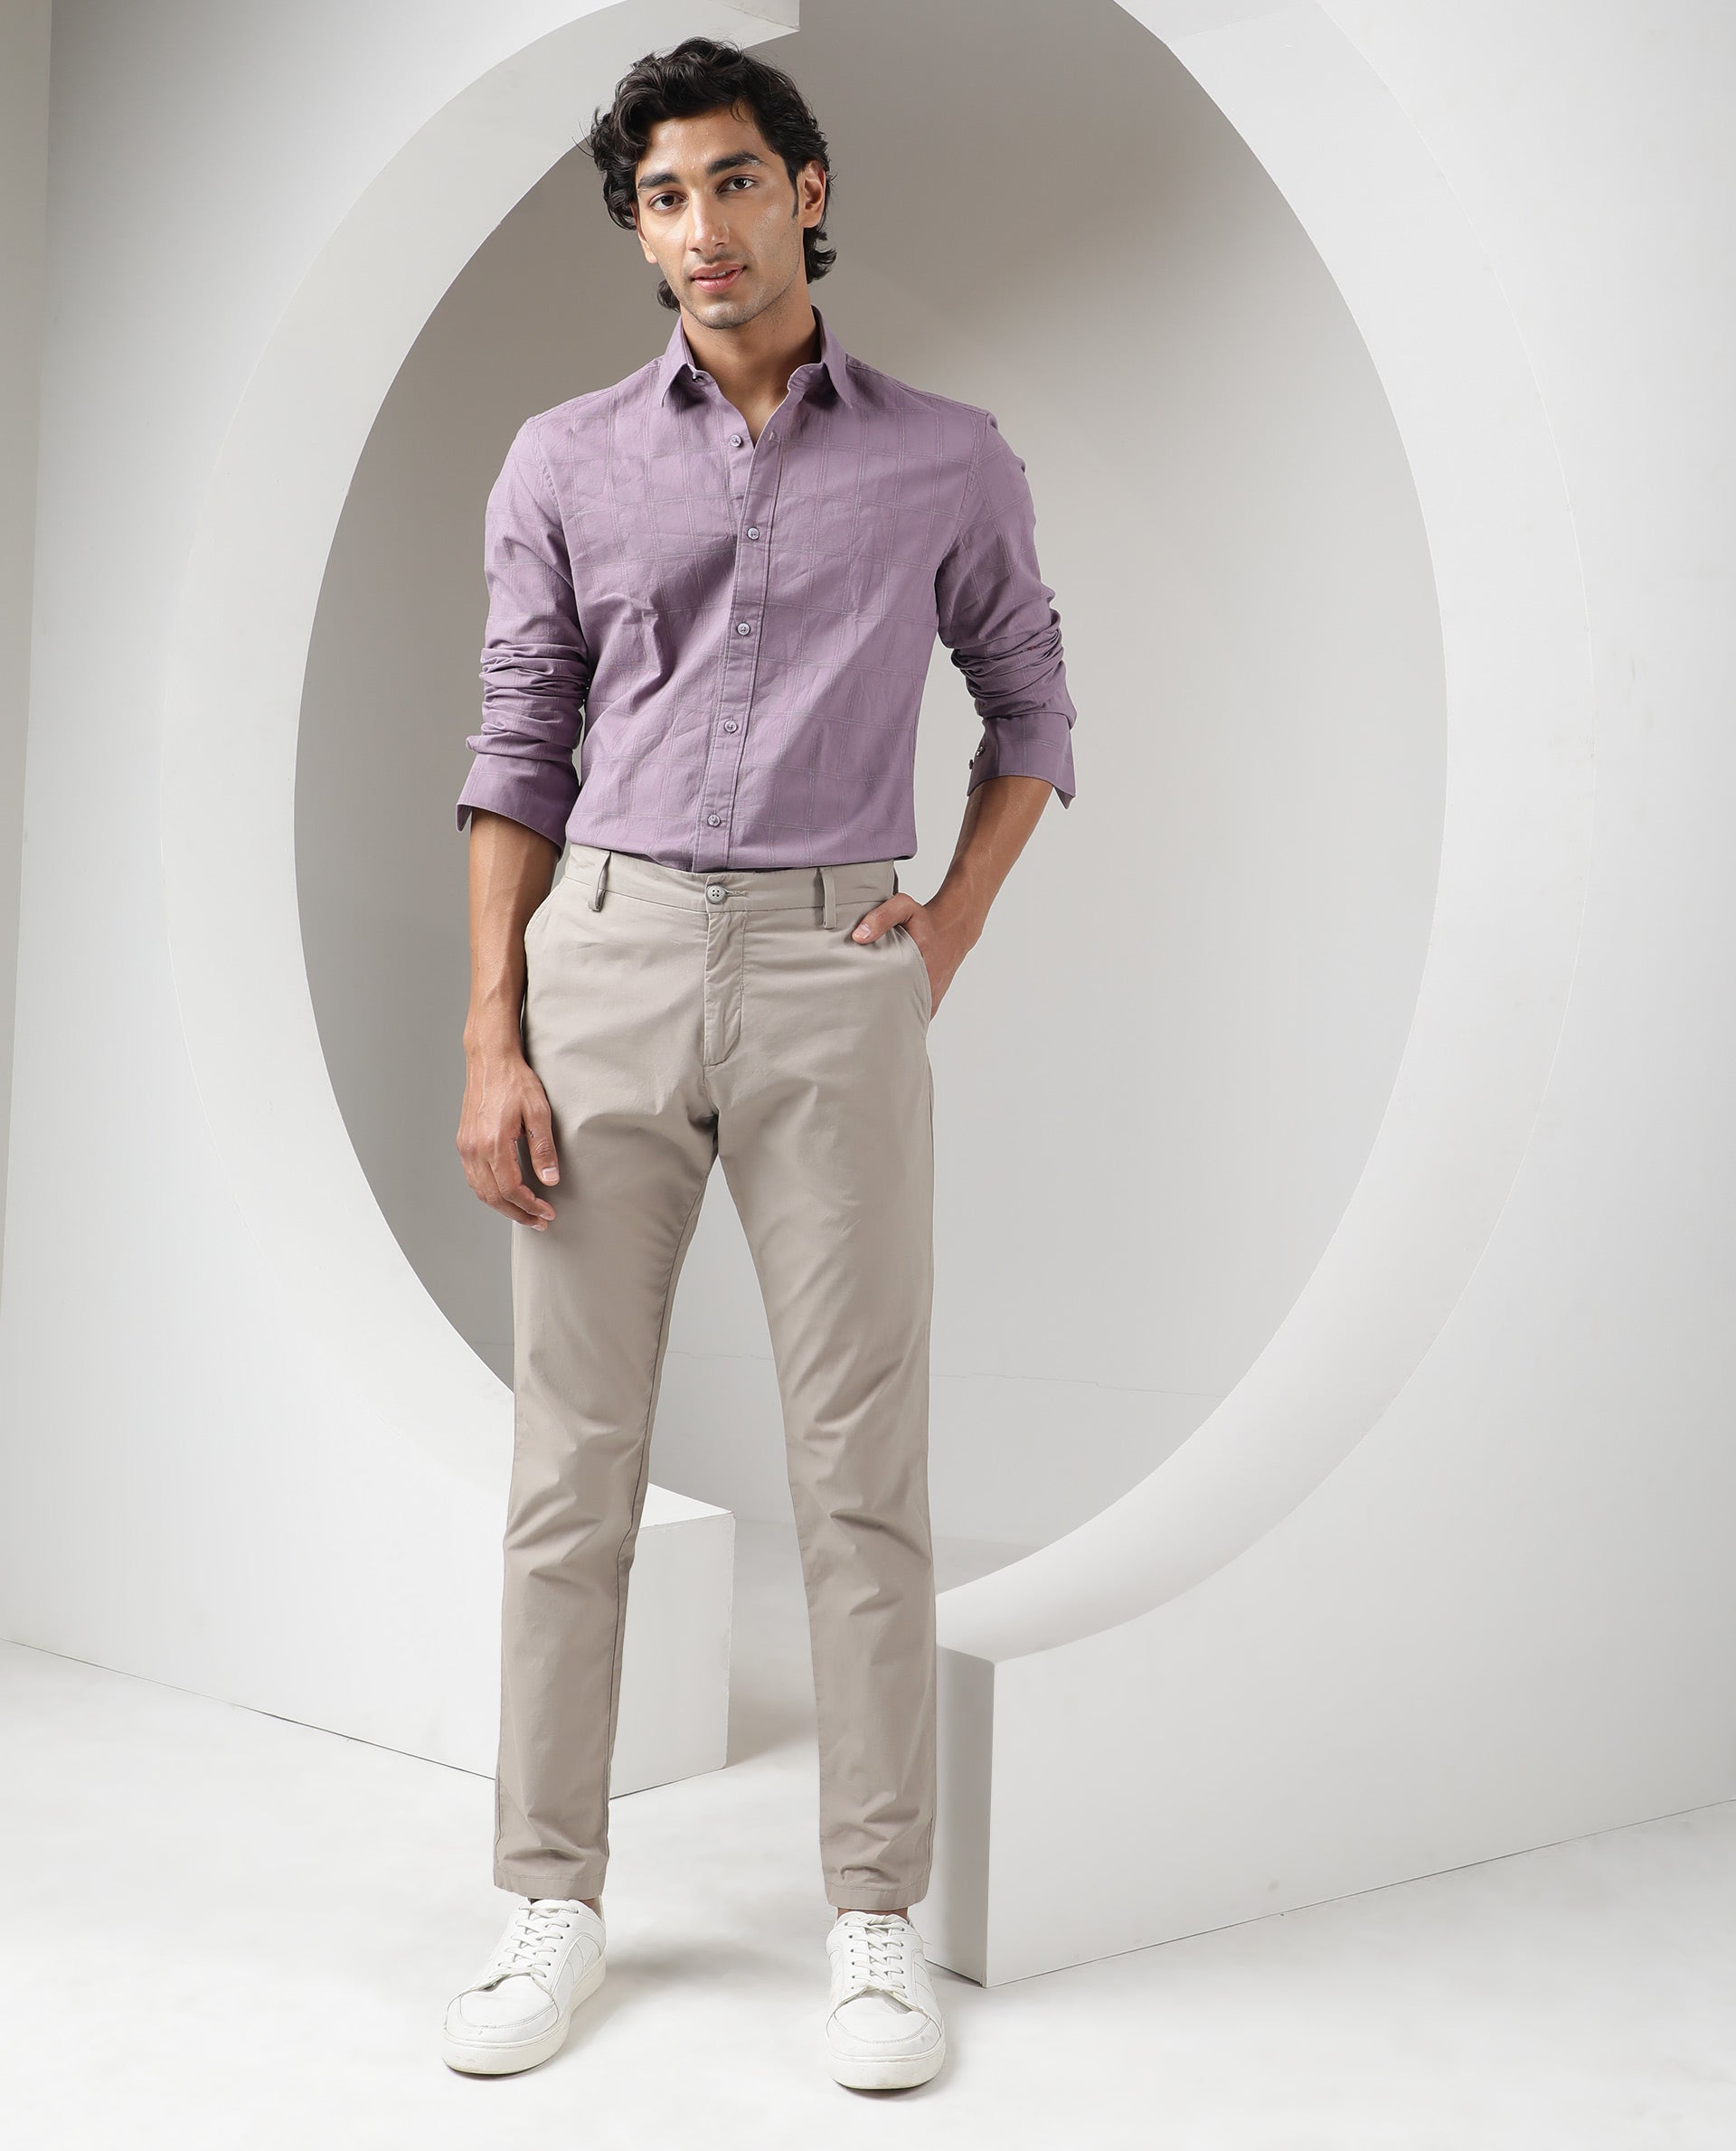 Buy Ansh Fashion Wear Men Regular fit Formal Shirt - Purple Online at Low  Prices in India - Paytmmall.com